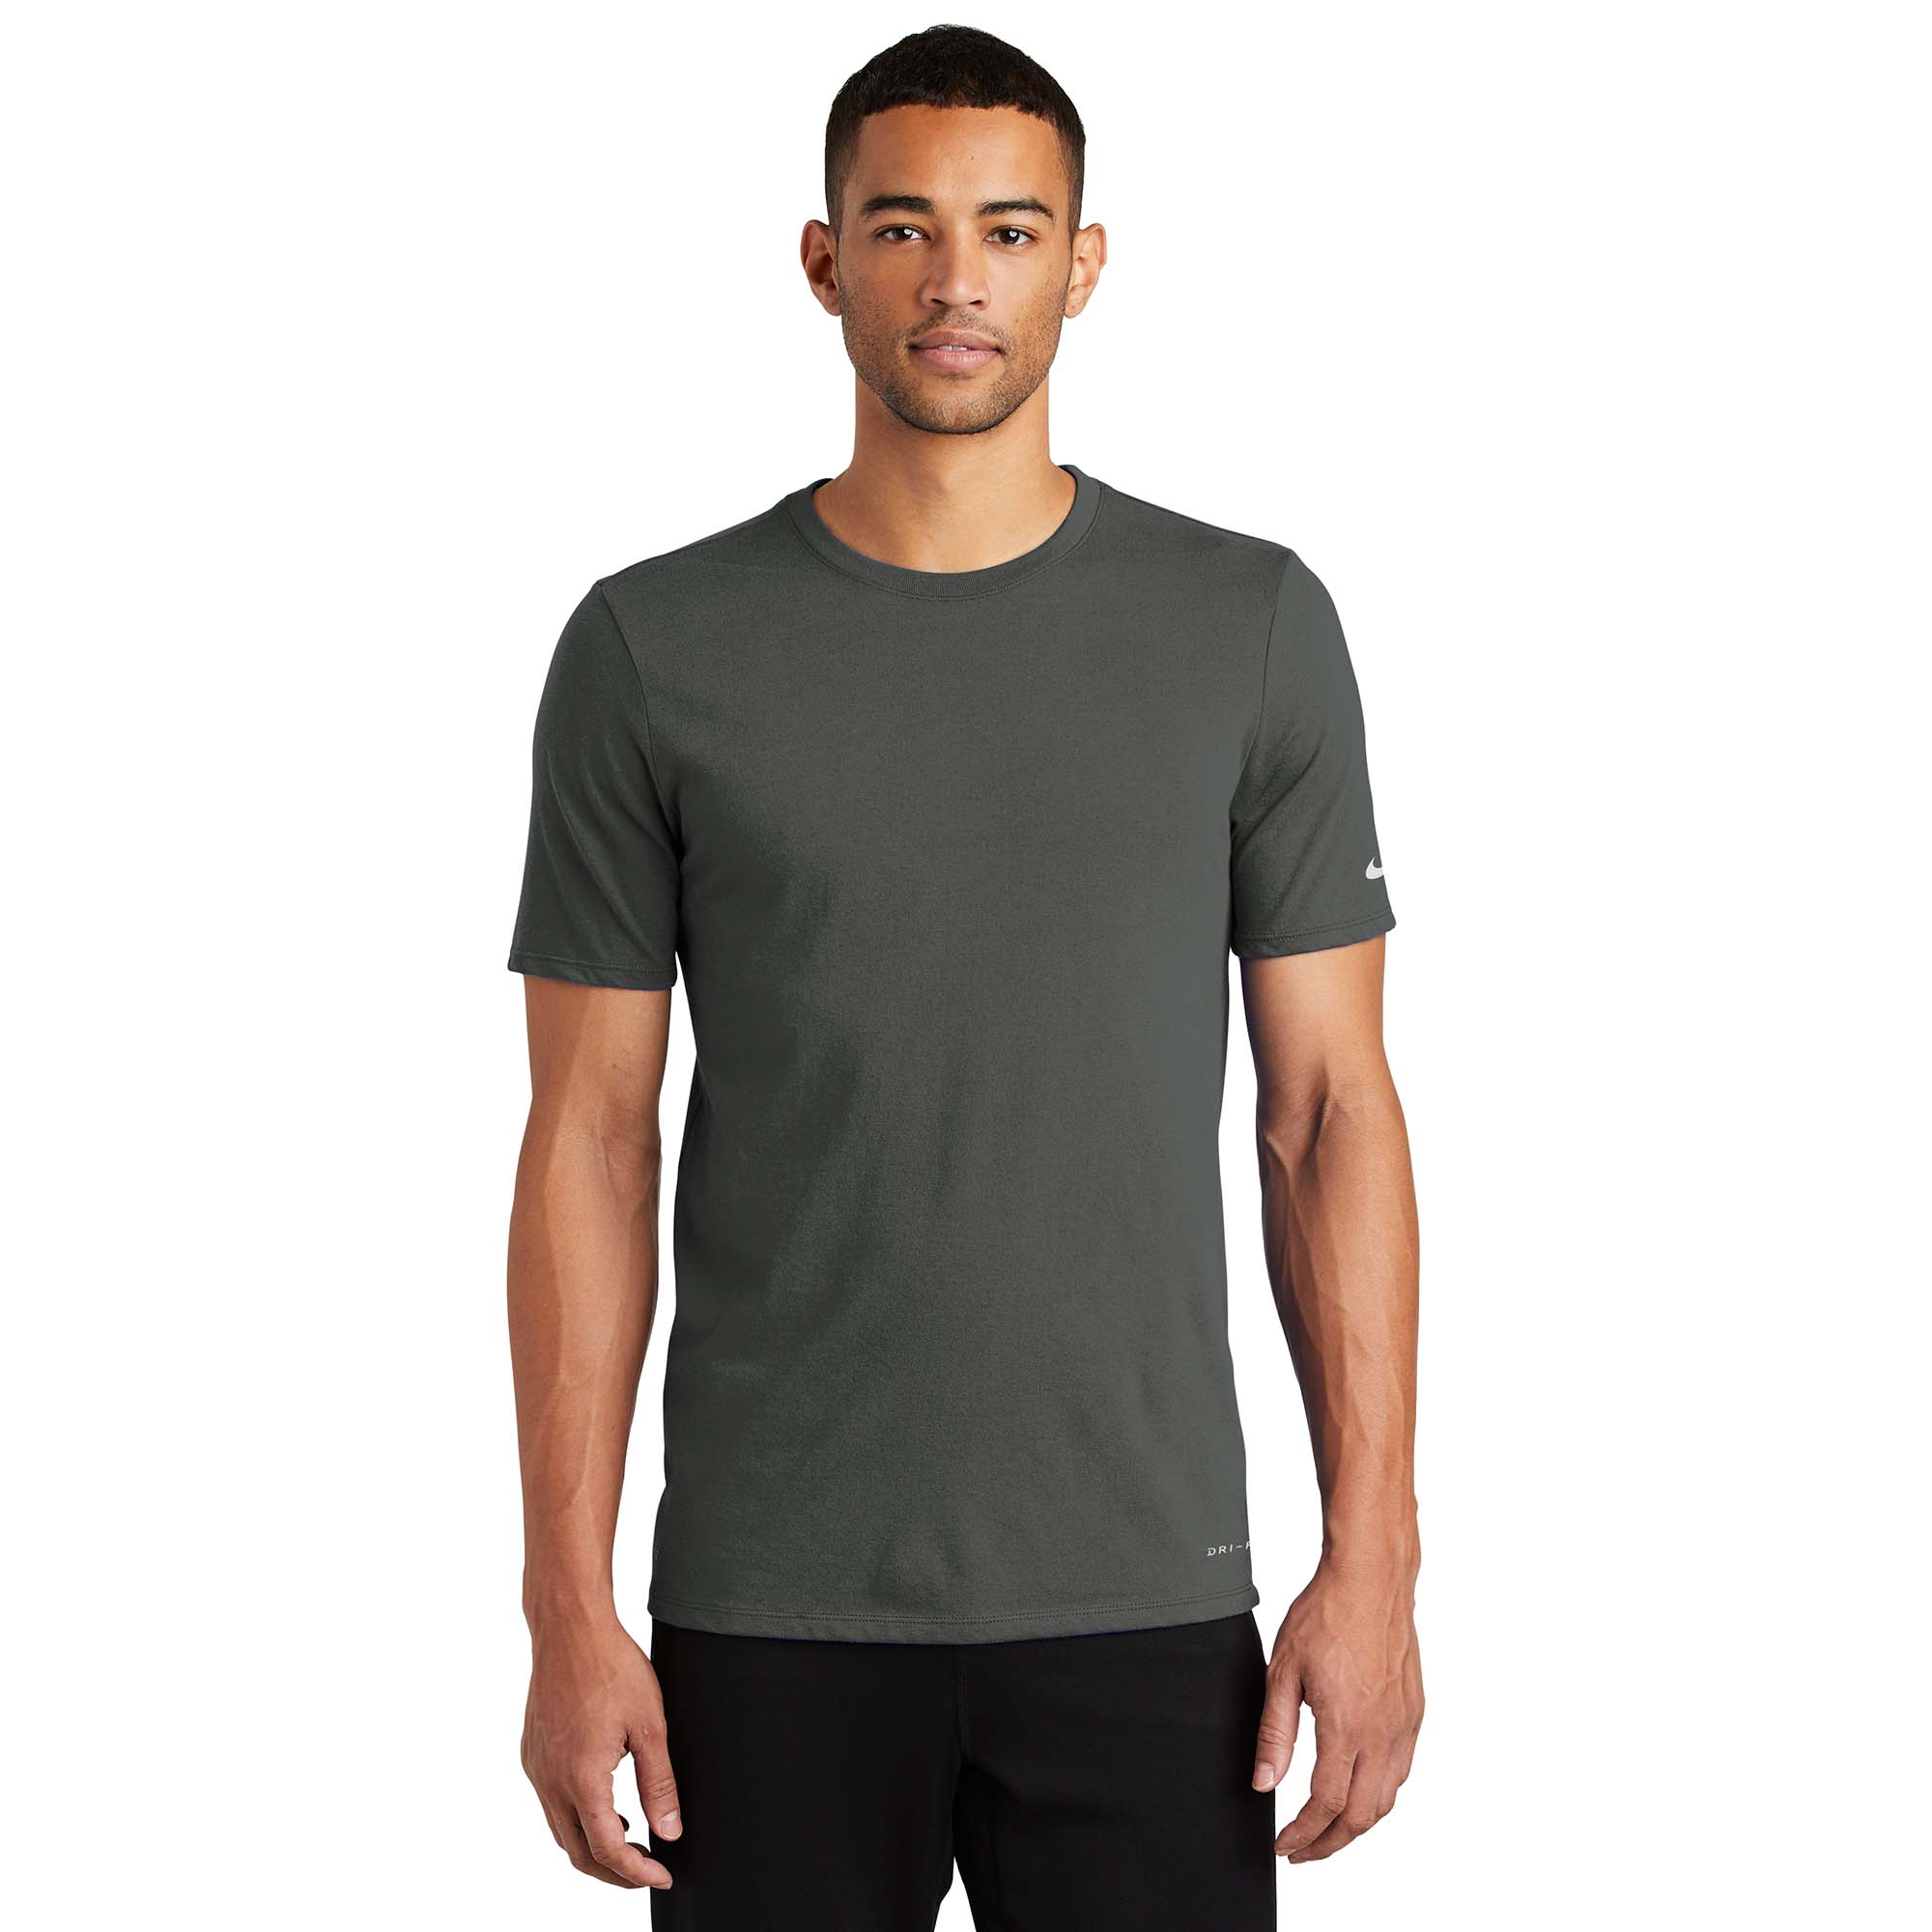 Nike NKBQ5231 Dri-FIT Cotton/Poly Short Sleeve Tee - Anthracite | Full ...